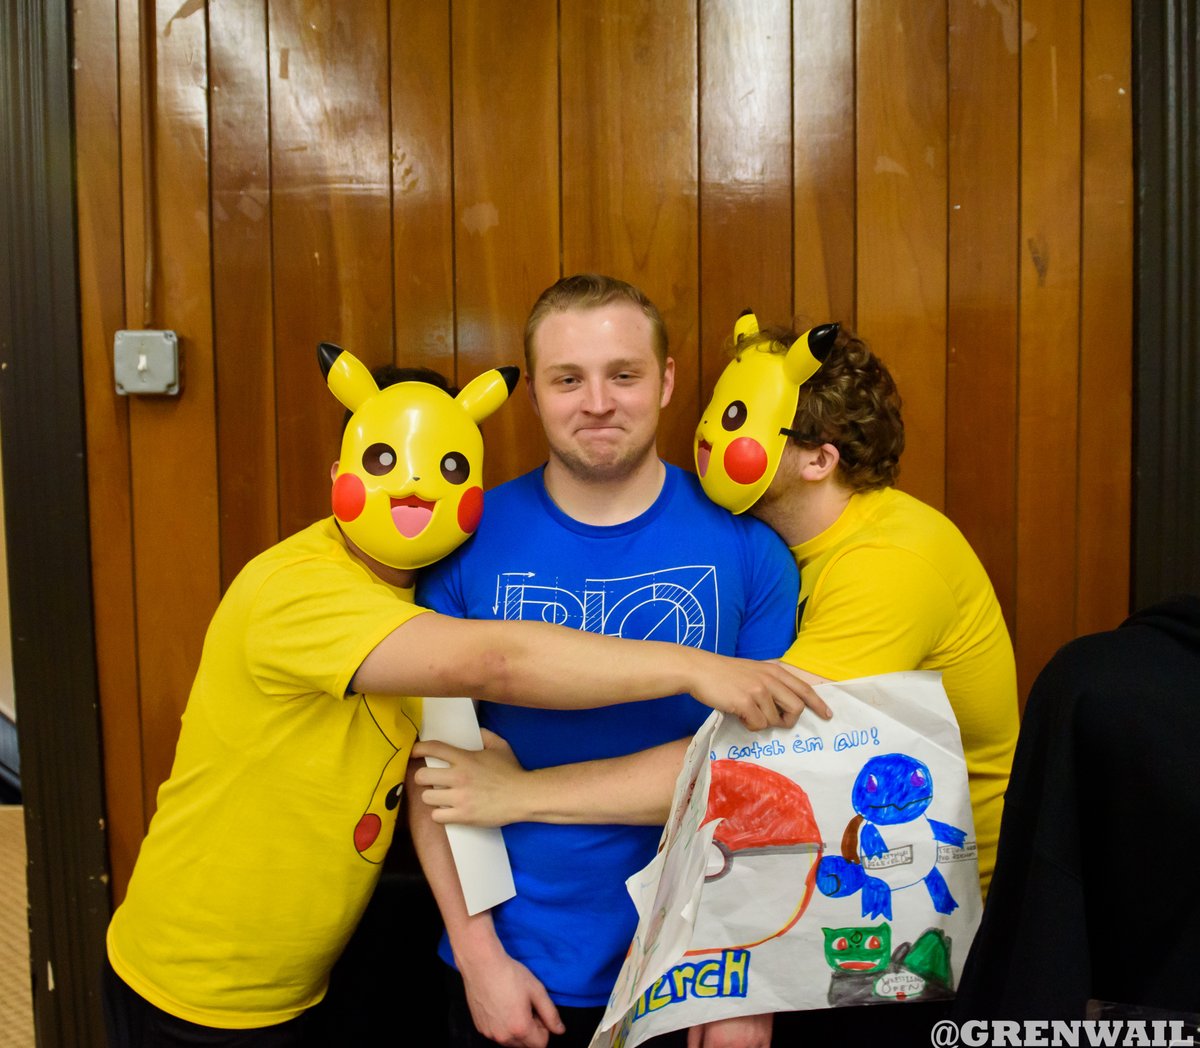 This Pokémon Trainer did a poor job of controlling their Pikachu's the other night. @WrestlingOpen